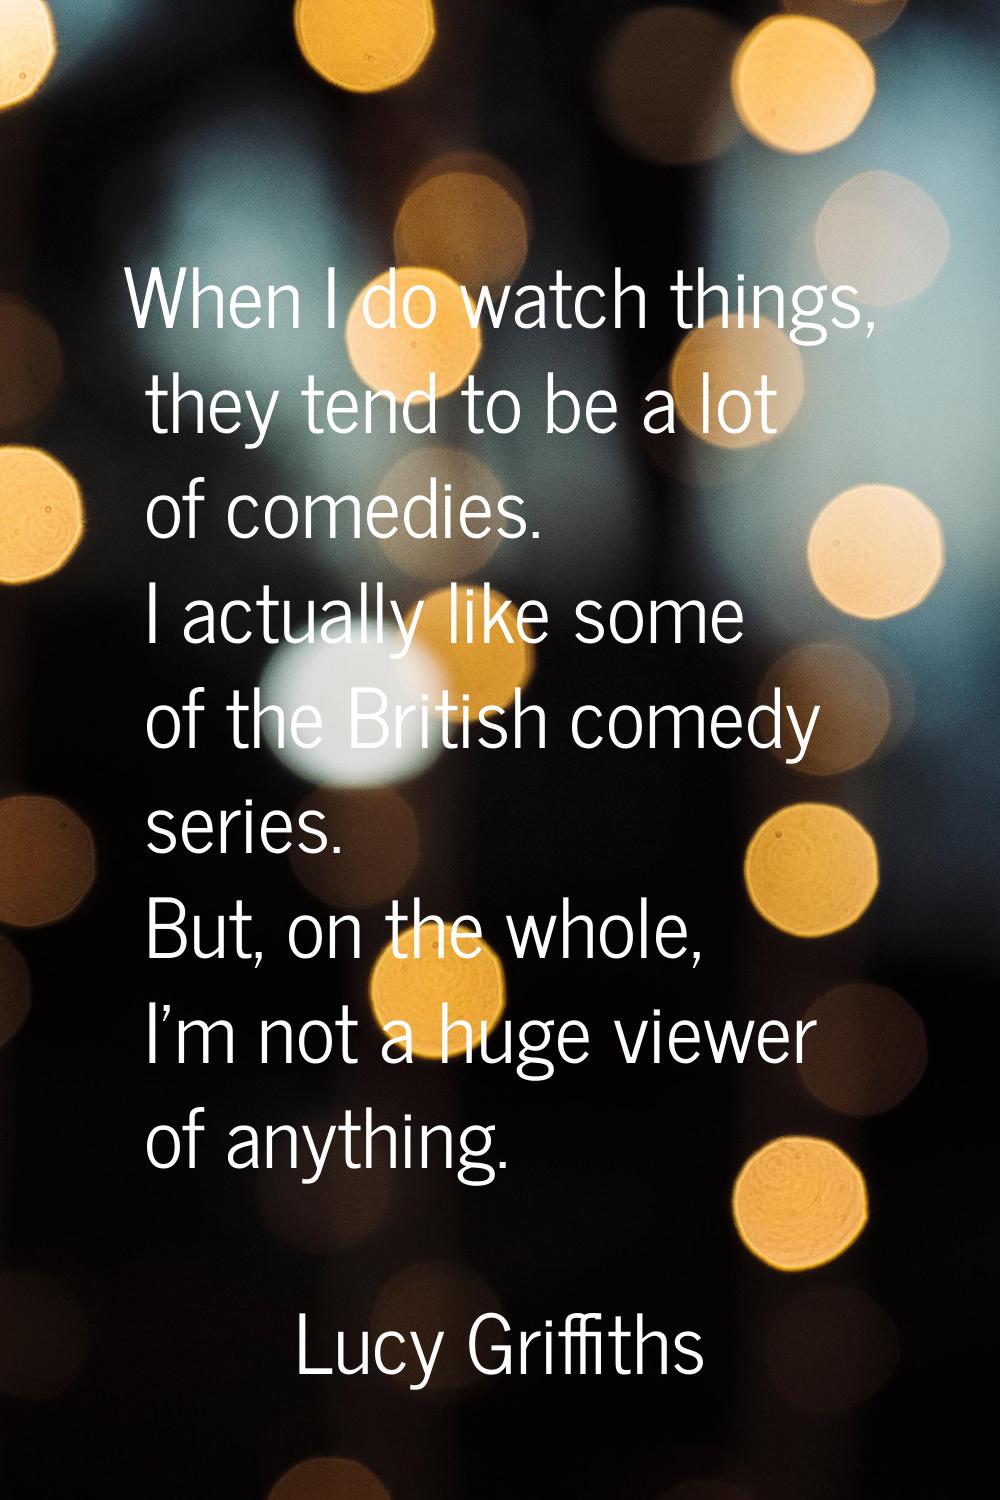 When I do watch things, they tend to be a lot of comedies. I actually like some of the British come